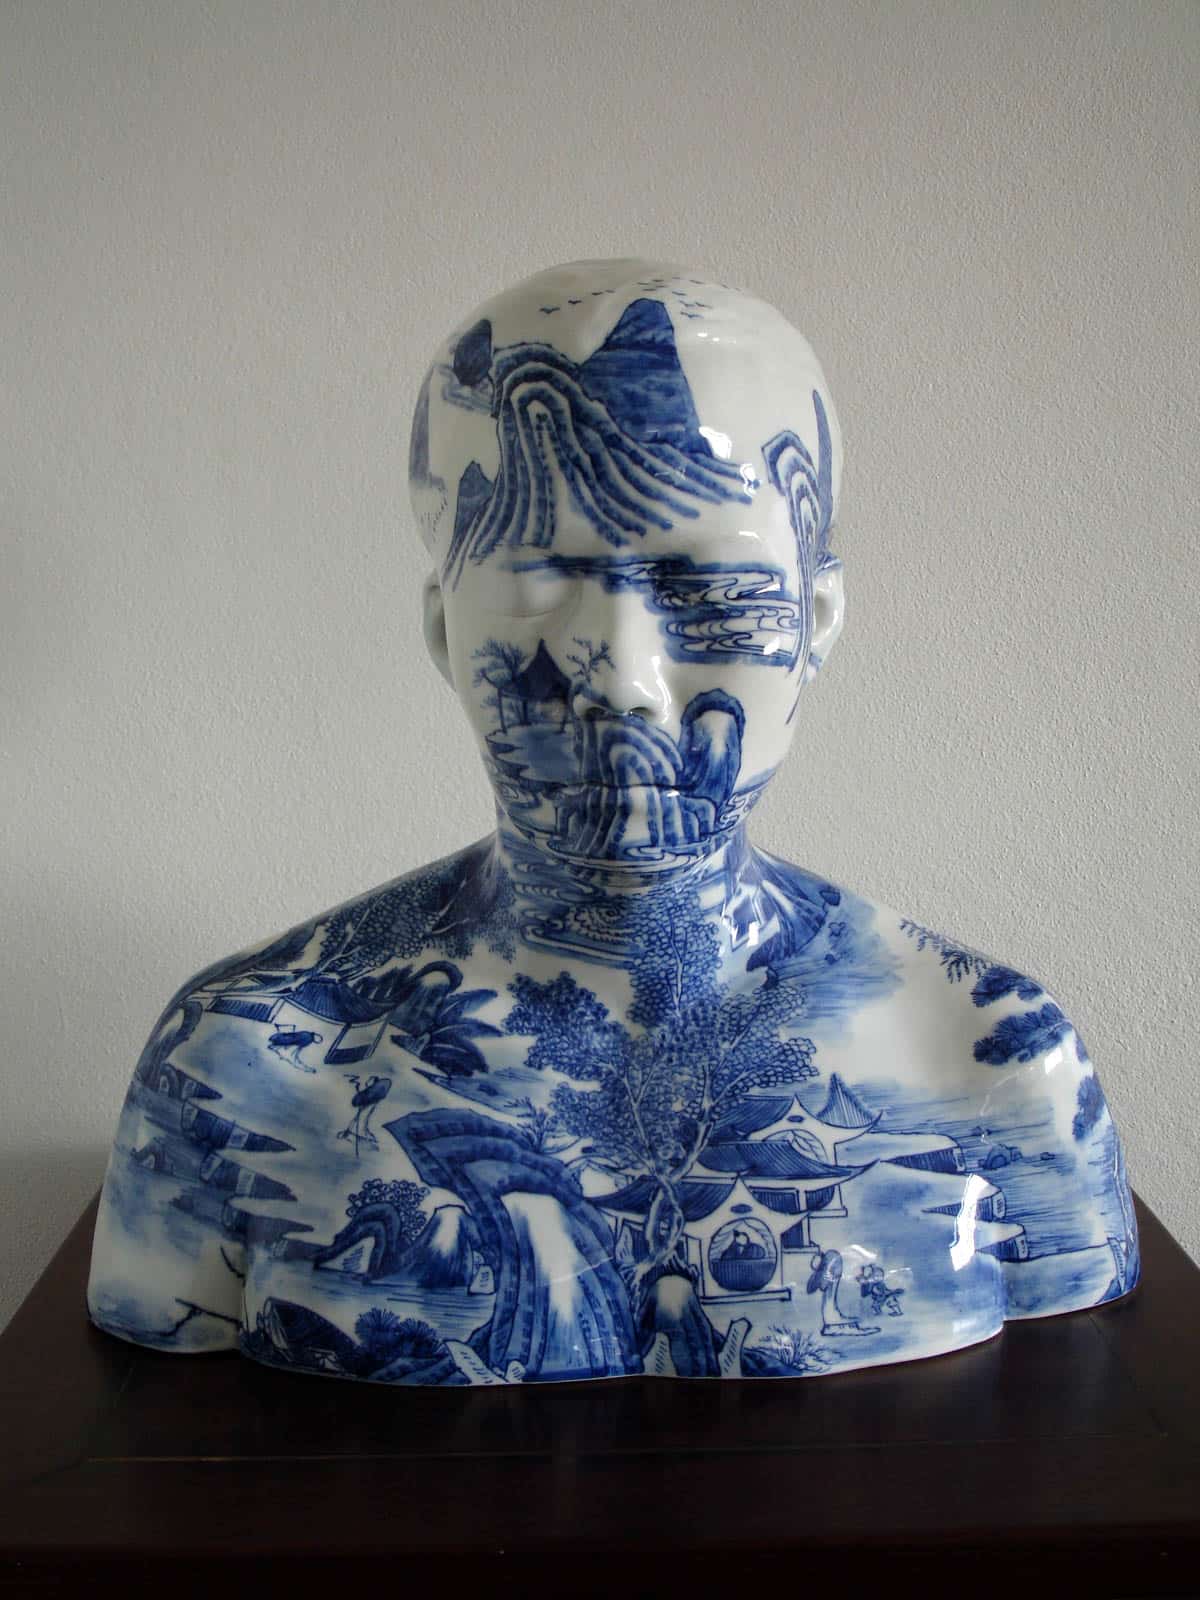 Porcelain Busts Patterned With Chinese Decorative Motifs By Ah Xian 1